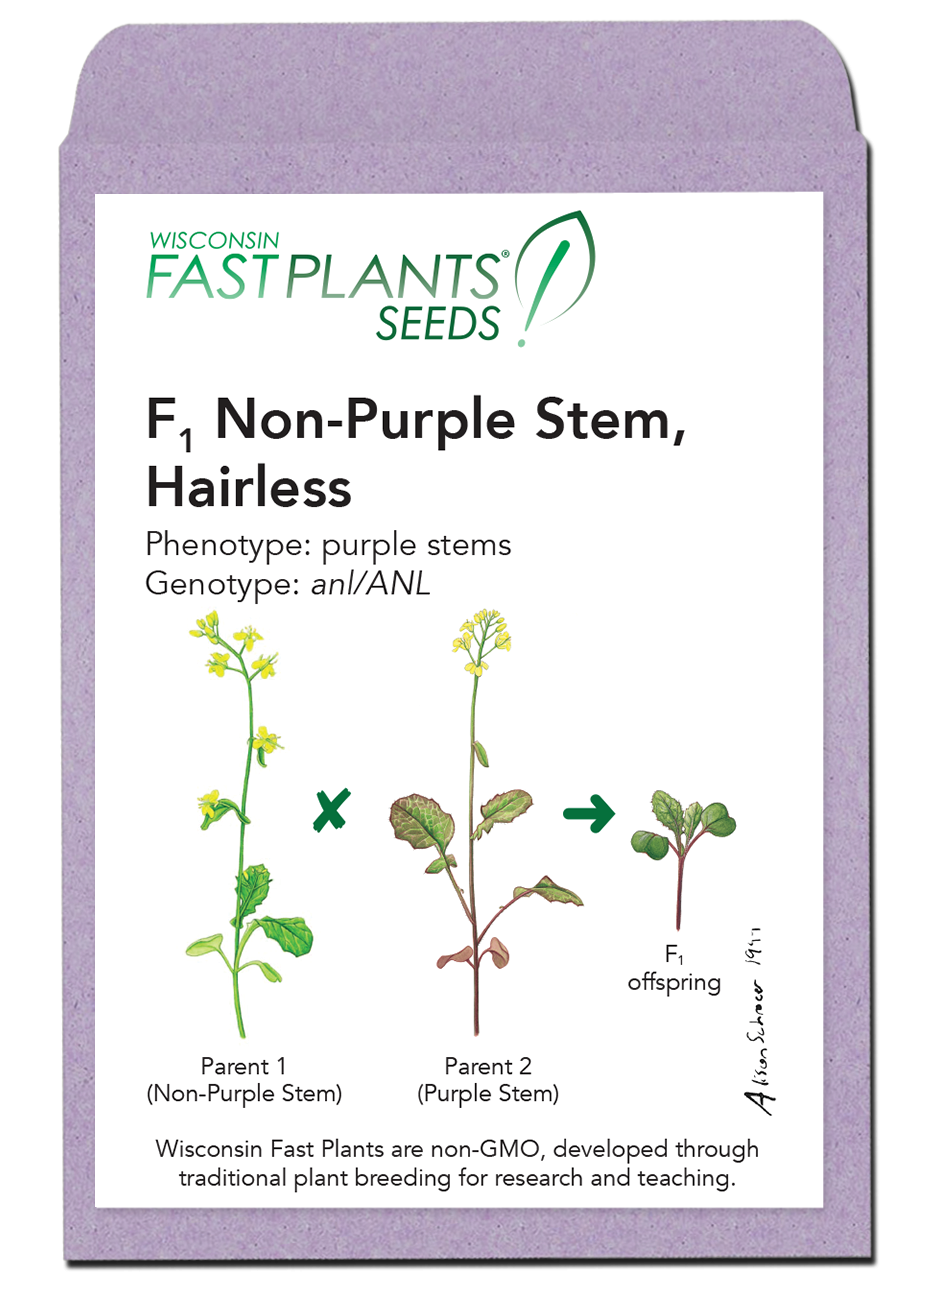 F1 Non-Purple Stem Fast Plants seed packet